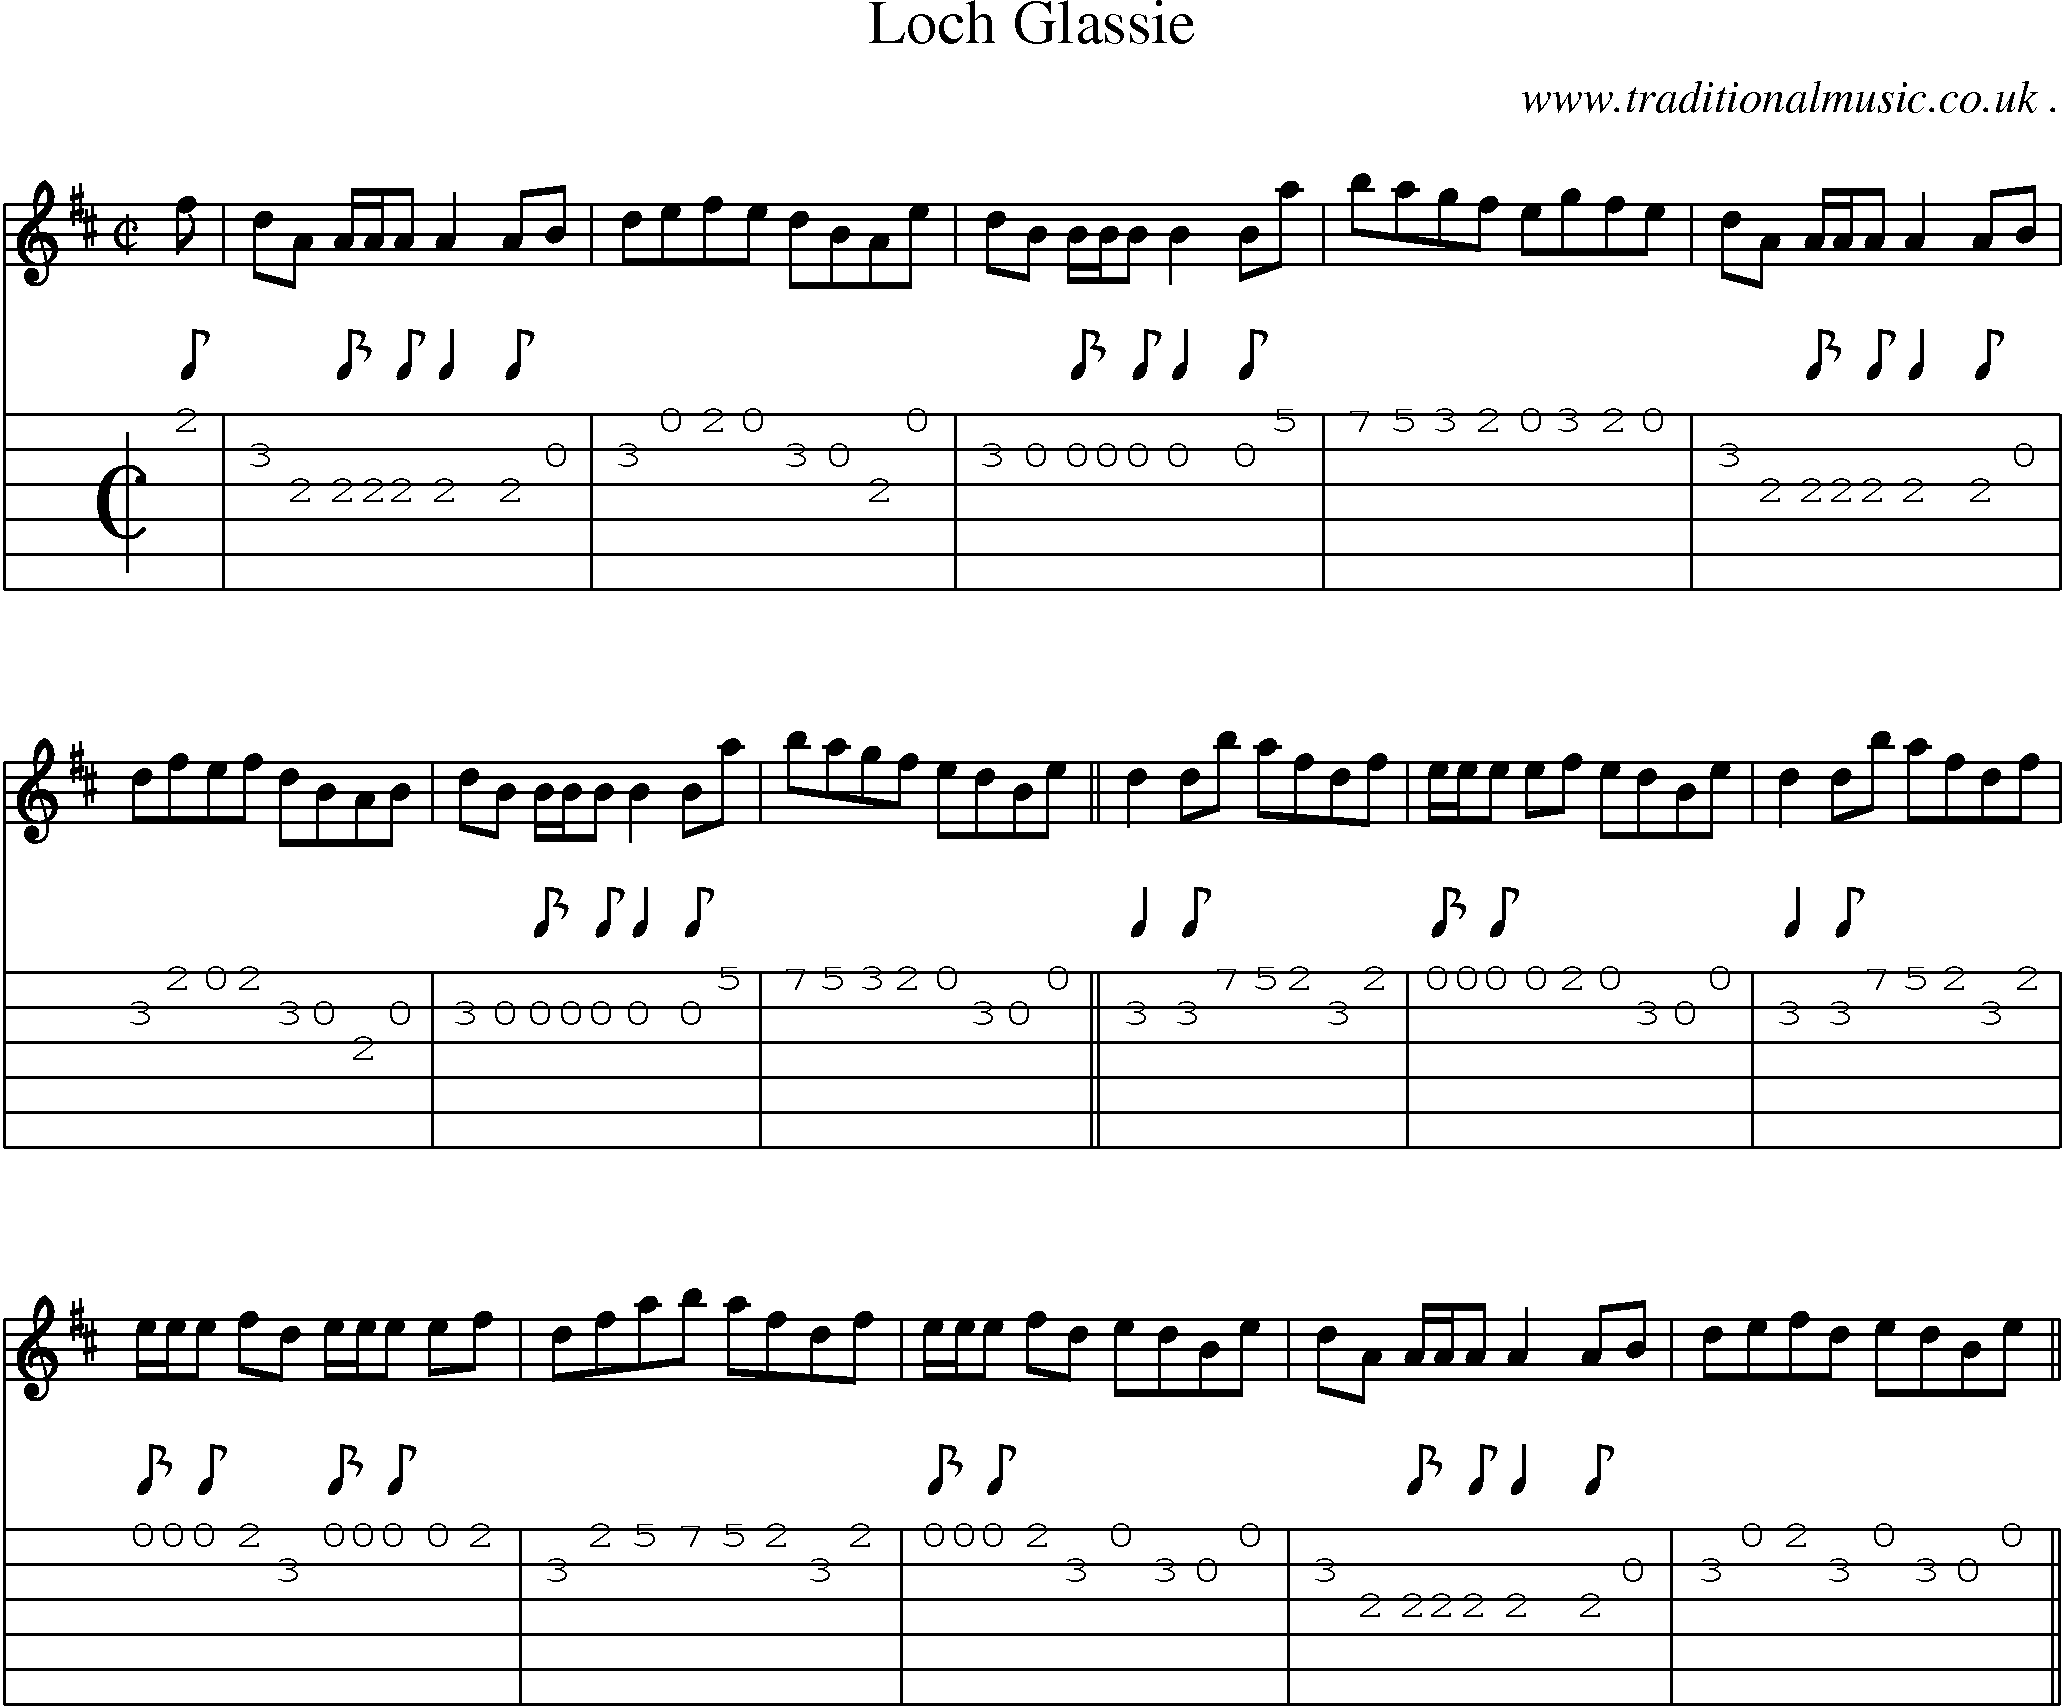 Sheet-music  score, Chords and Guitar Tabs for Loch Glassie